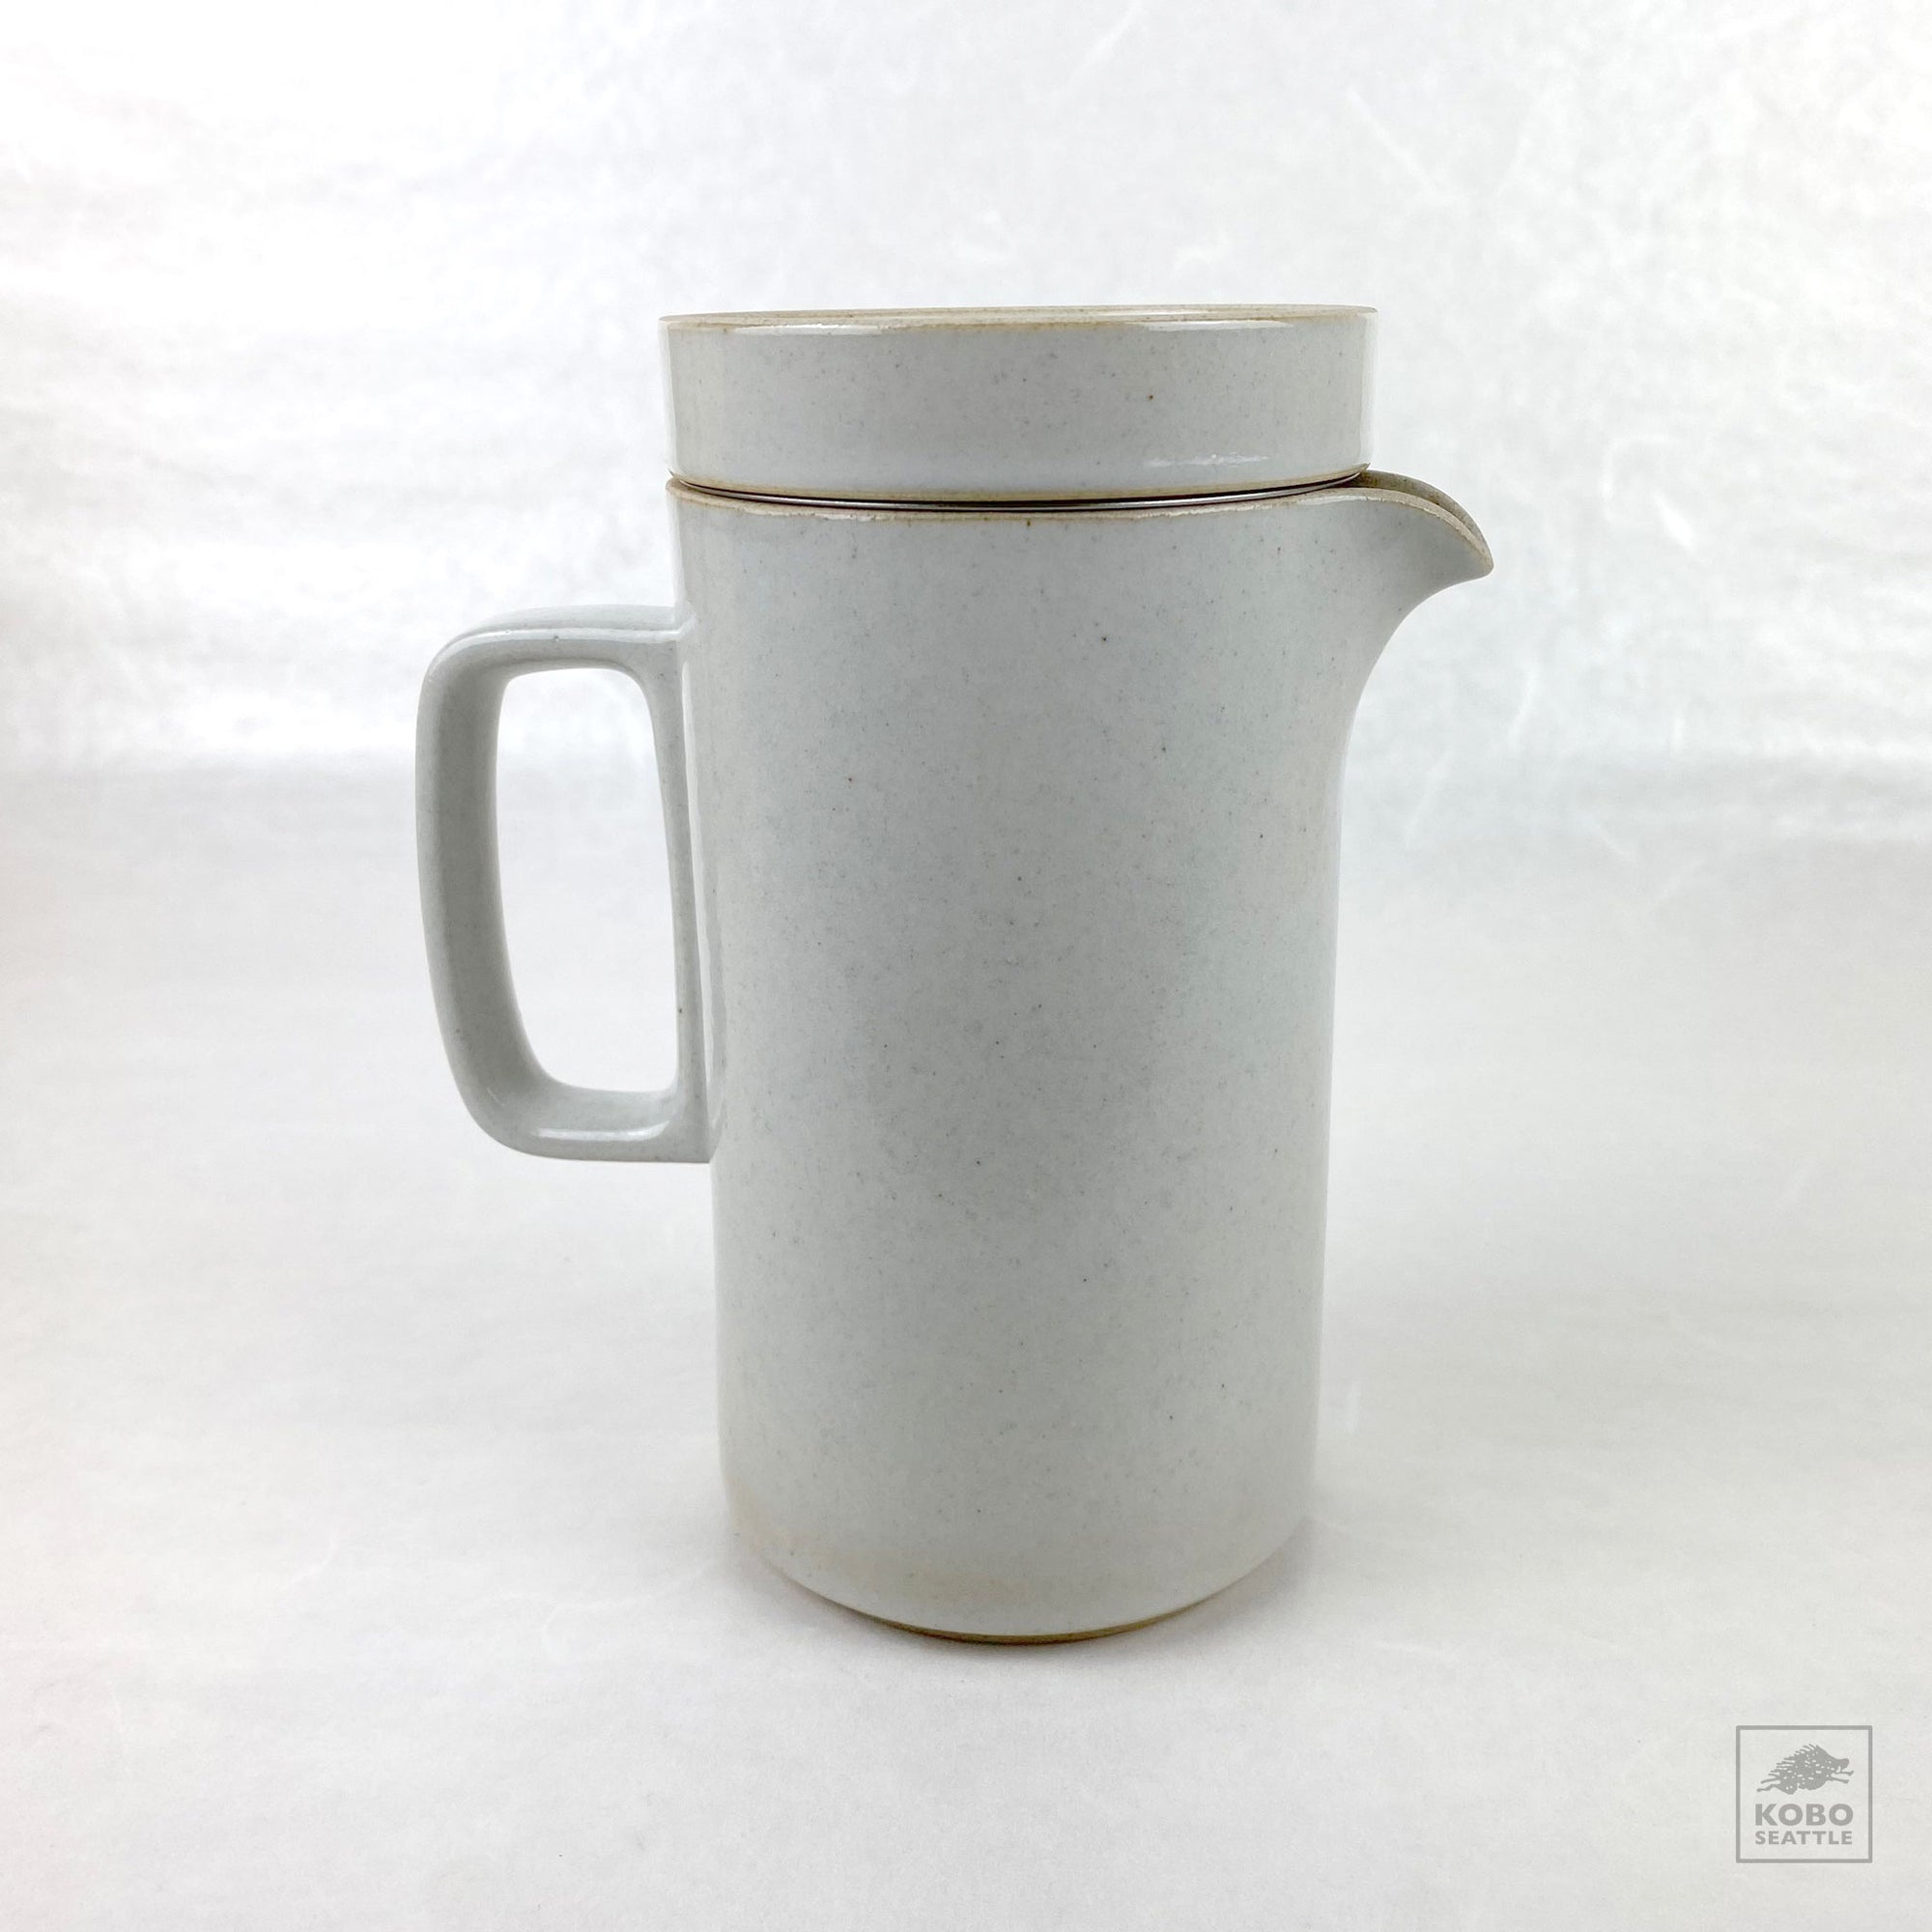 Hasami Porcelain Tall Tea Pot with Strainer